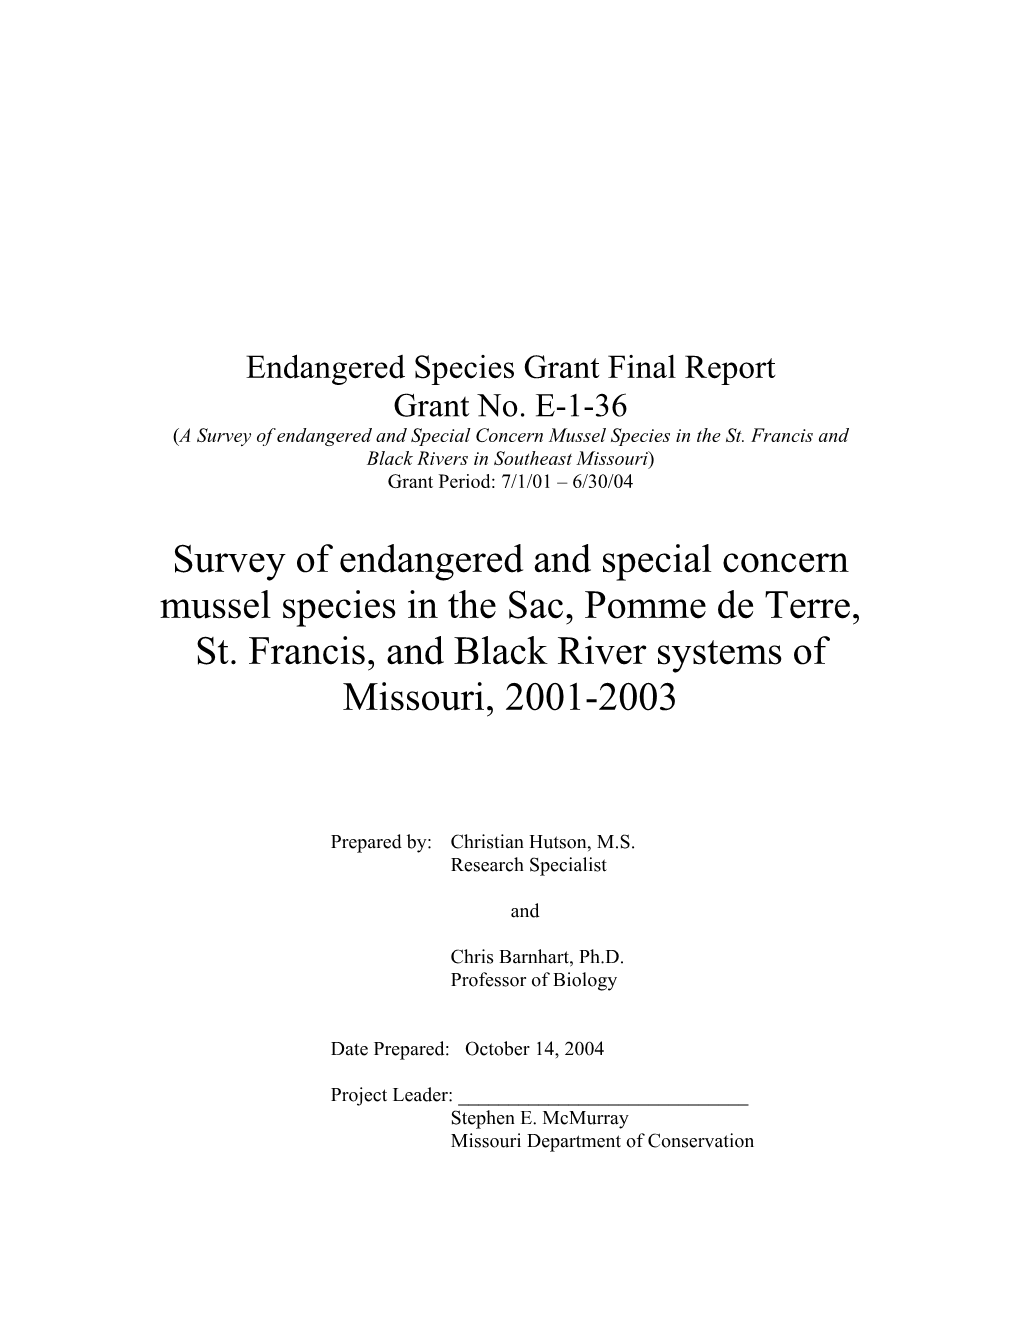 Survey of Endangered and Special Concern Mussel Species in the Sac, Pomme De Terre, St